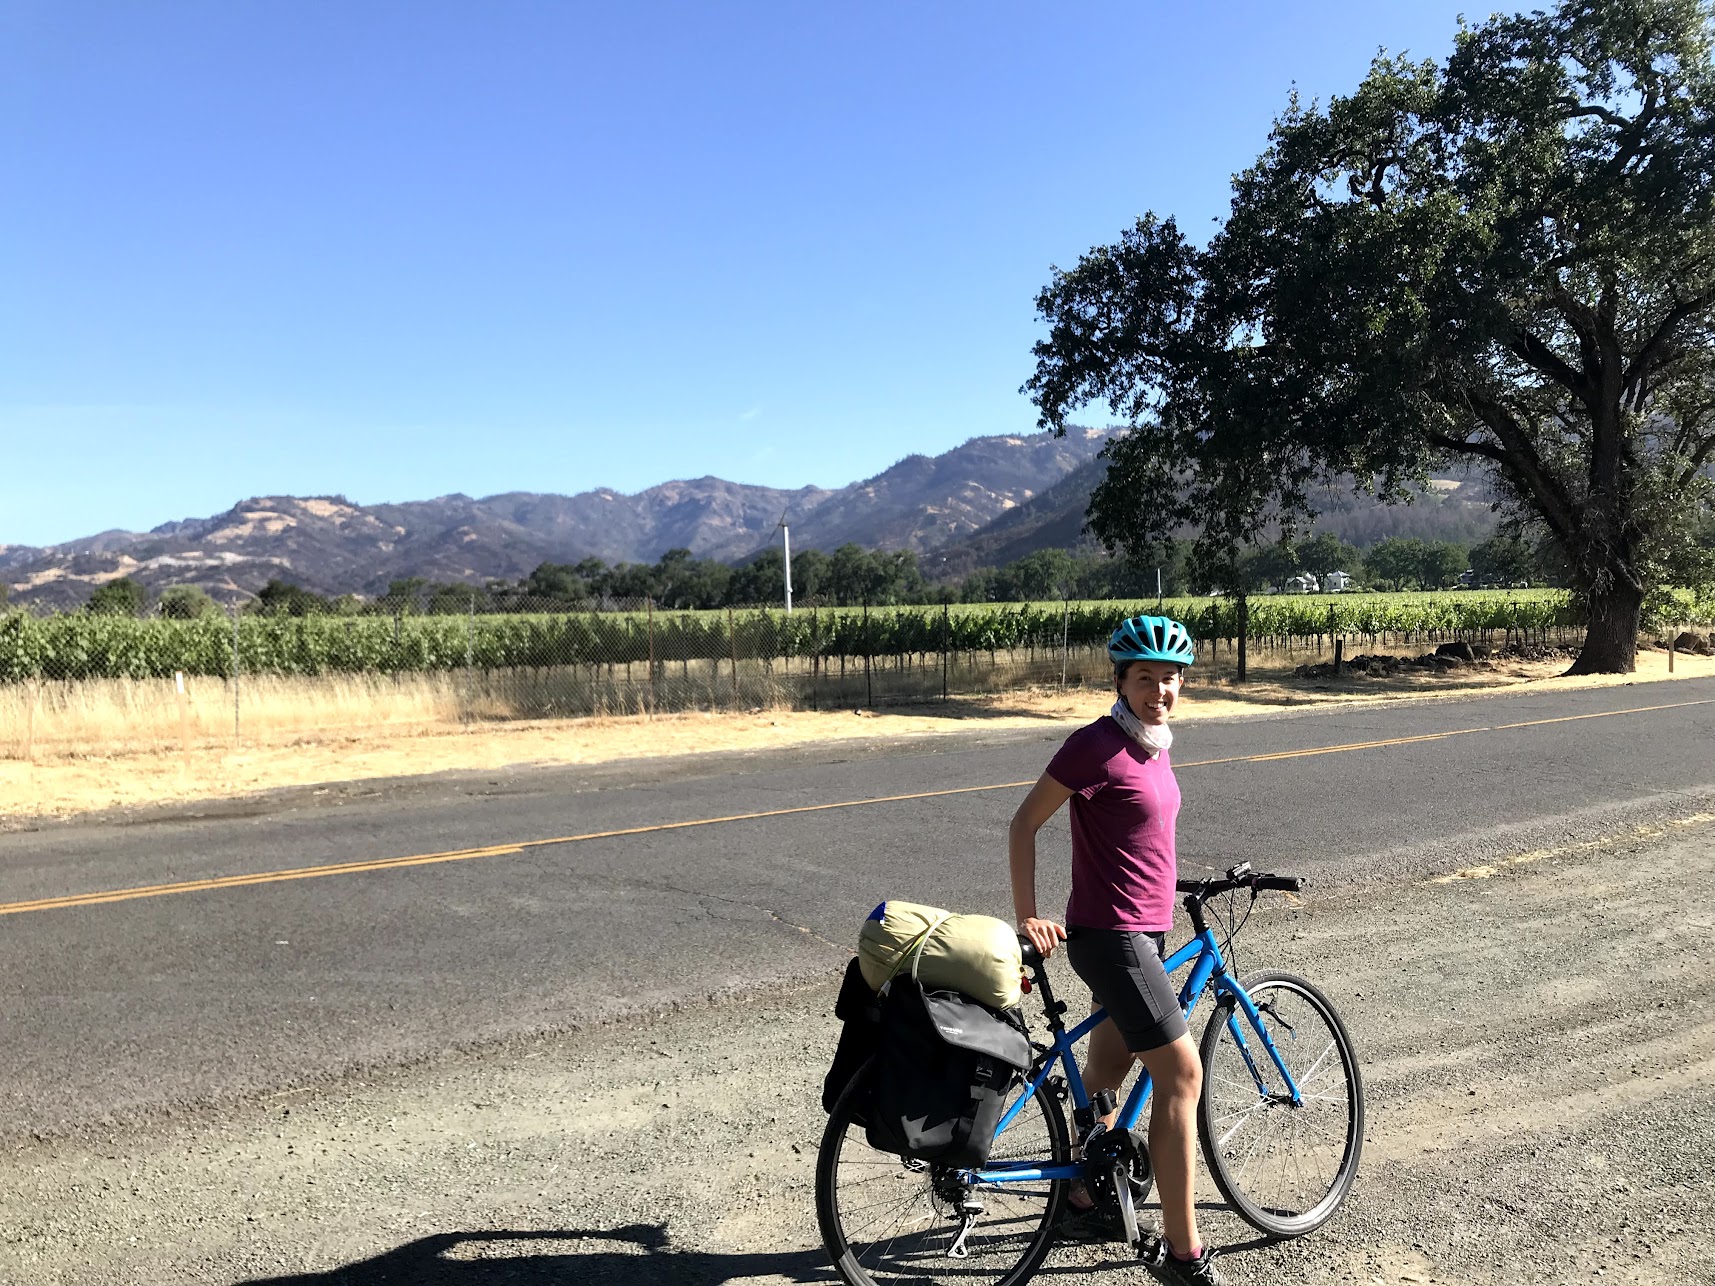 Here’s me bike-packing in Napa Valley!